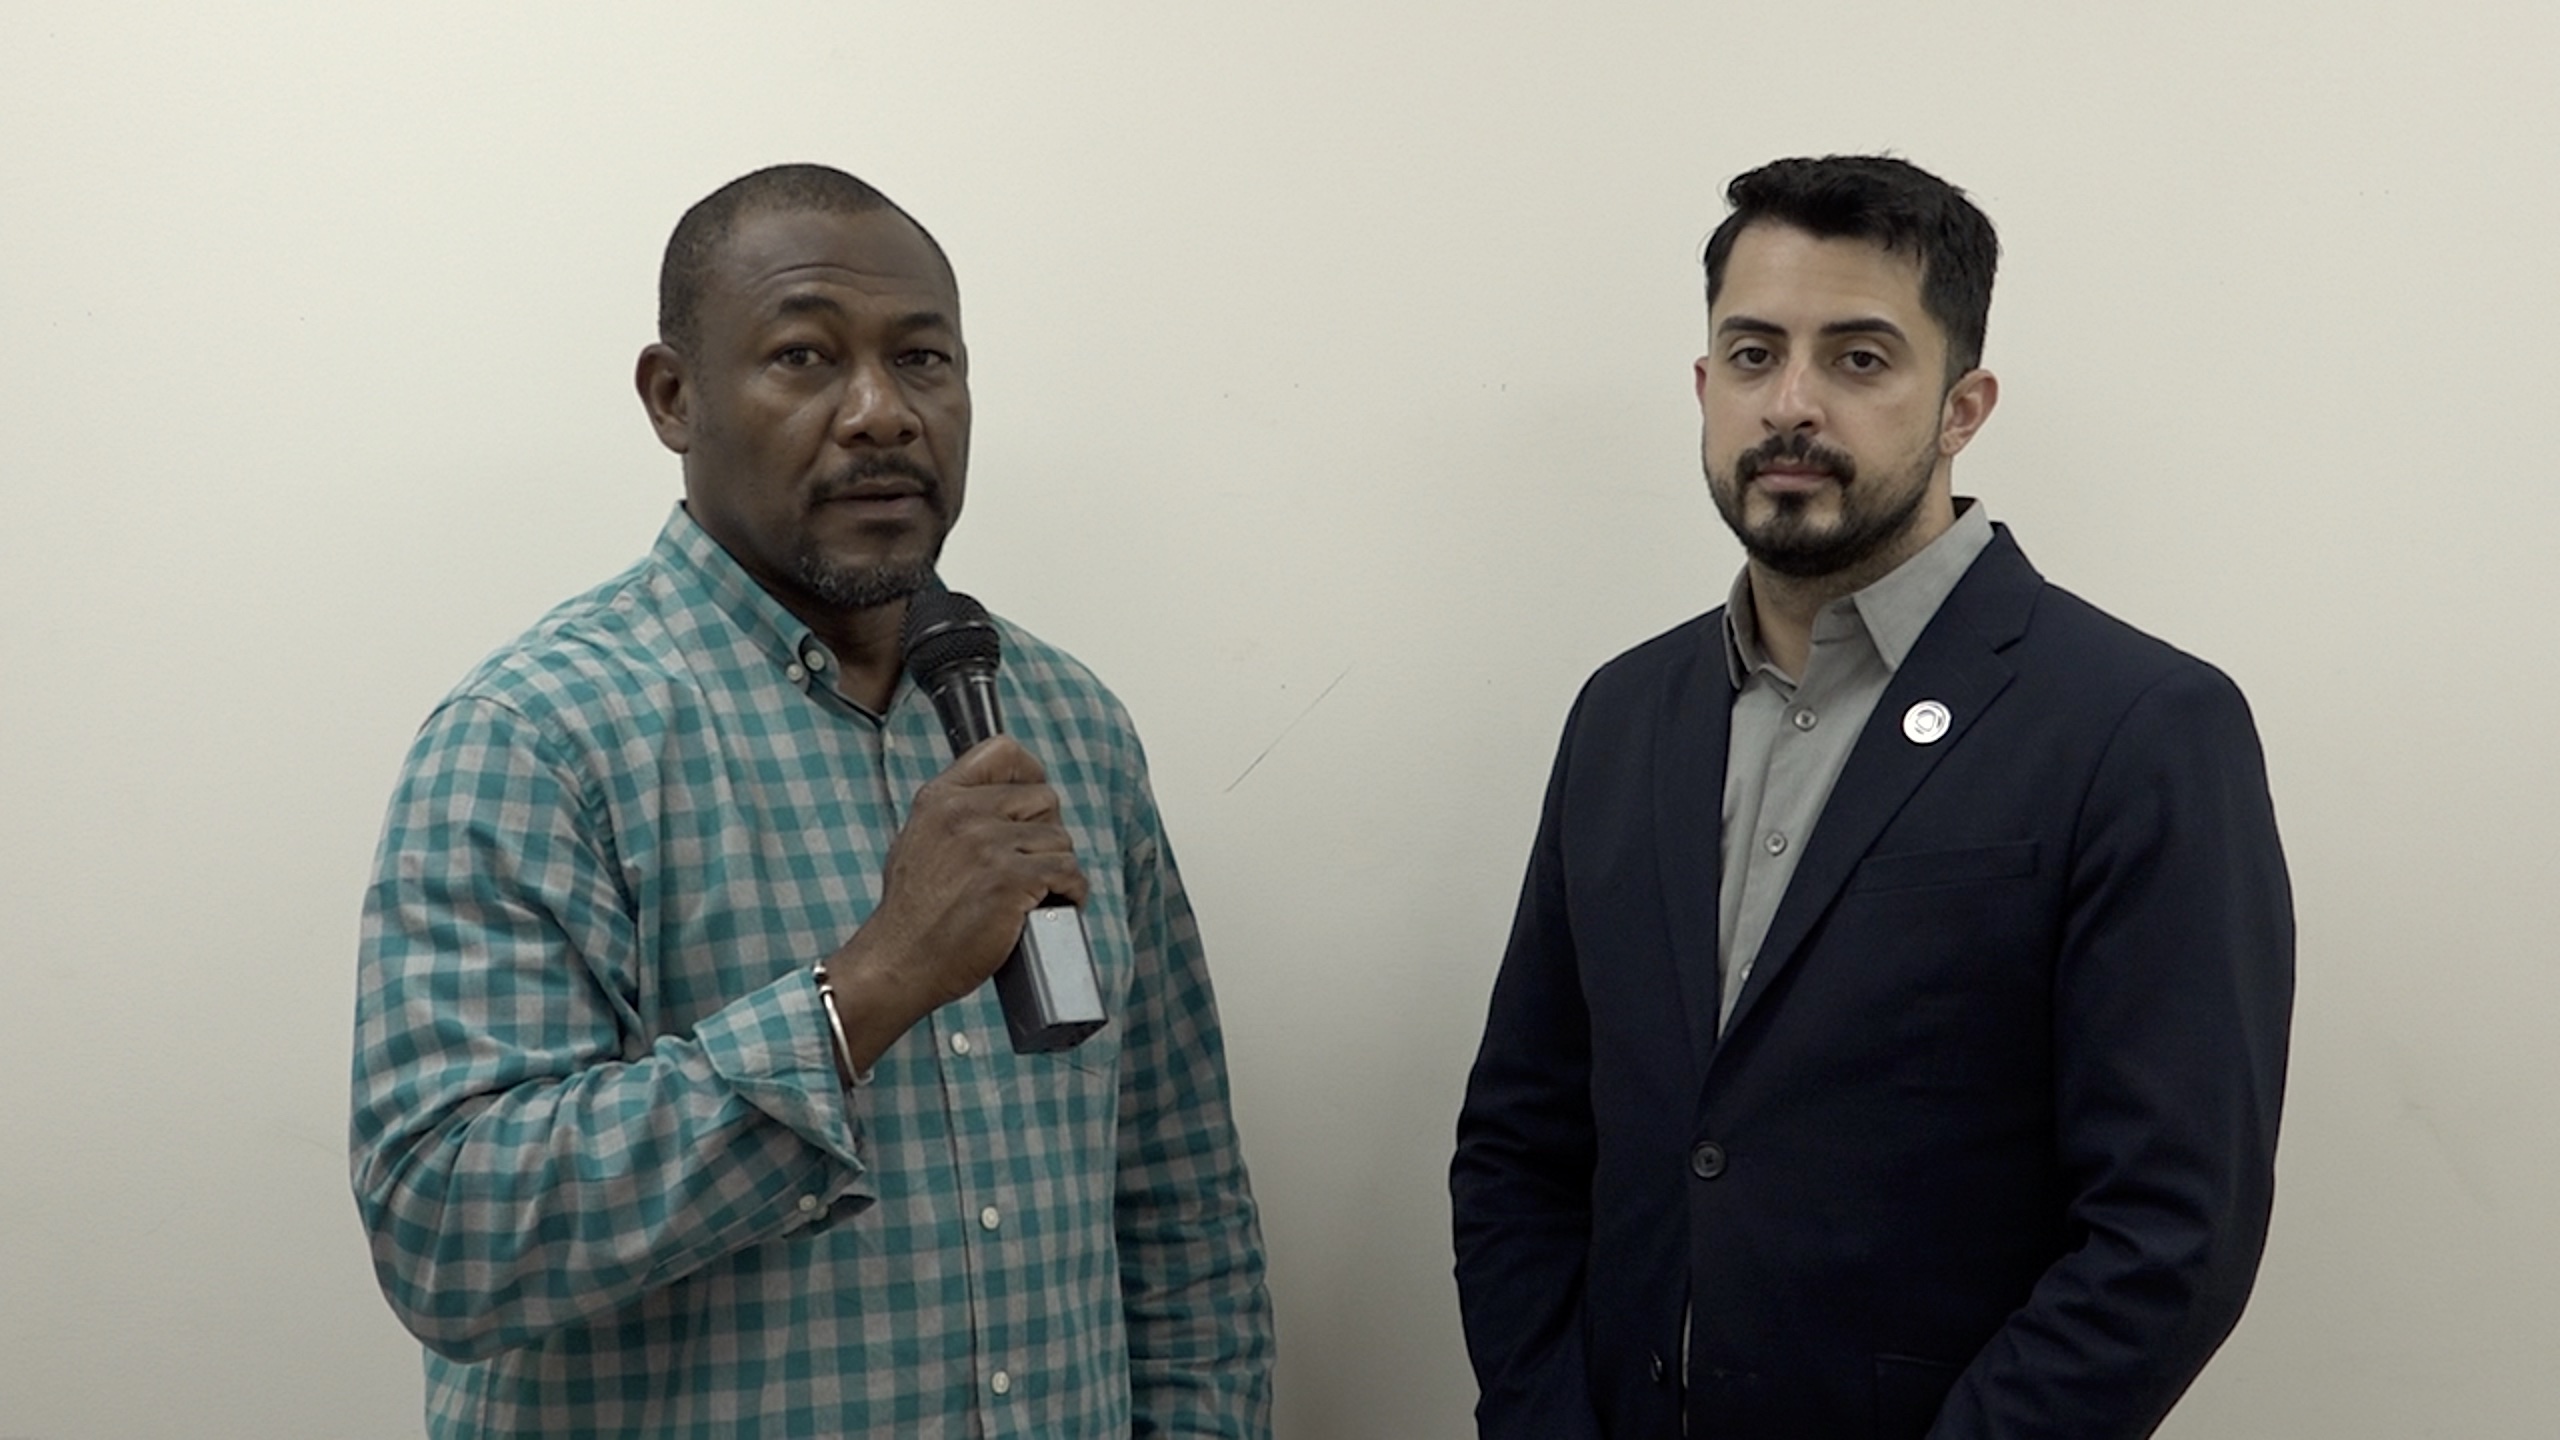 (L-r) Mr. Brian Dyer, Director of the Nevis Disaster Management Department, and Mr. Paulao Fernandes, the Latin American Caribbean Advisor for the Pacific Disaster Center at the University of Hawaii at the department’s conference room at Long Point on November 18, 2022